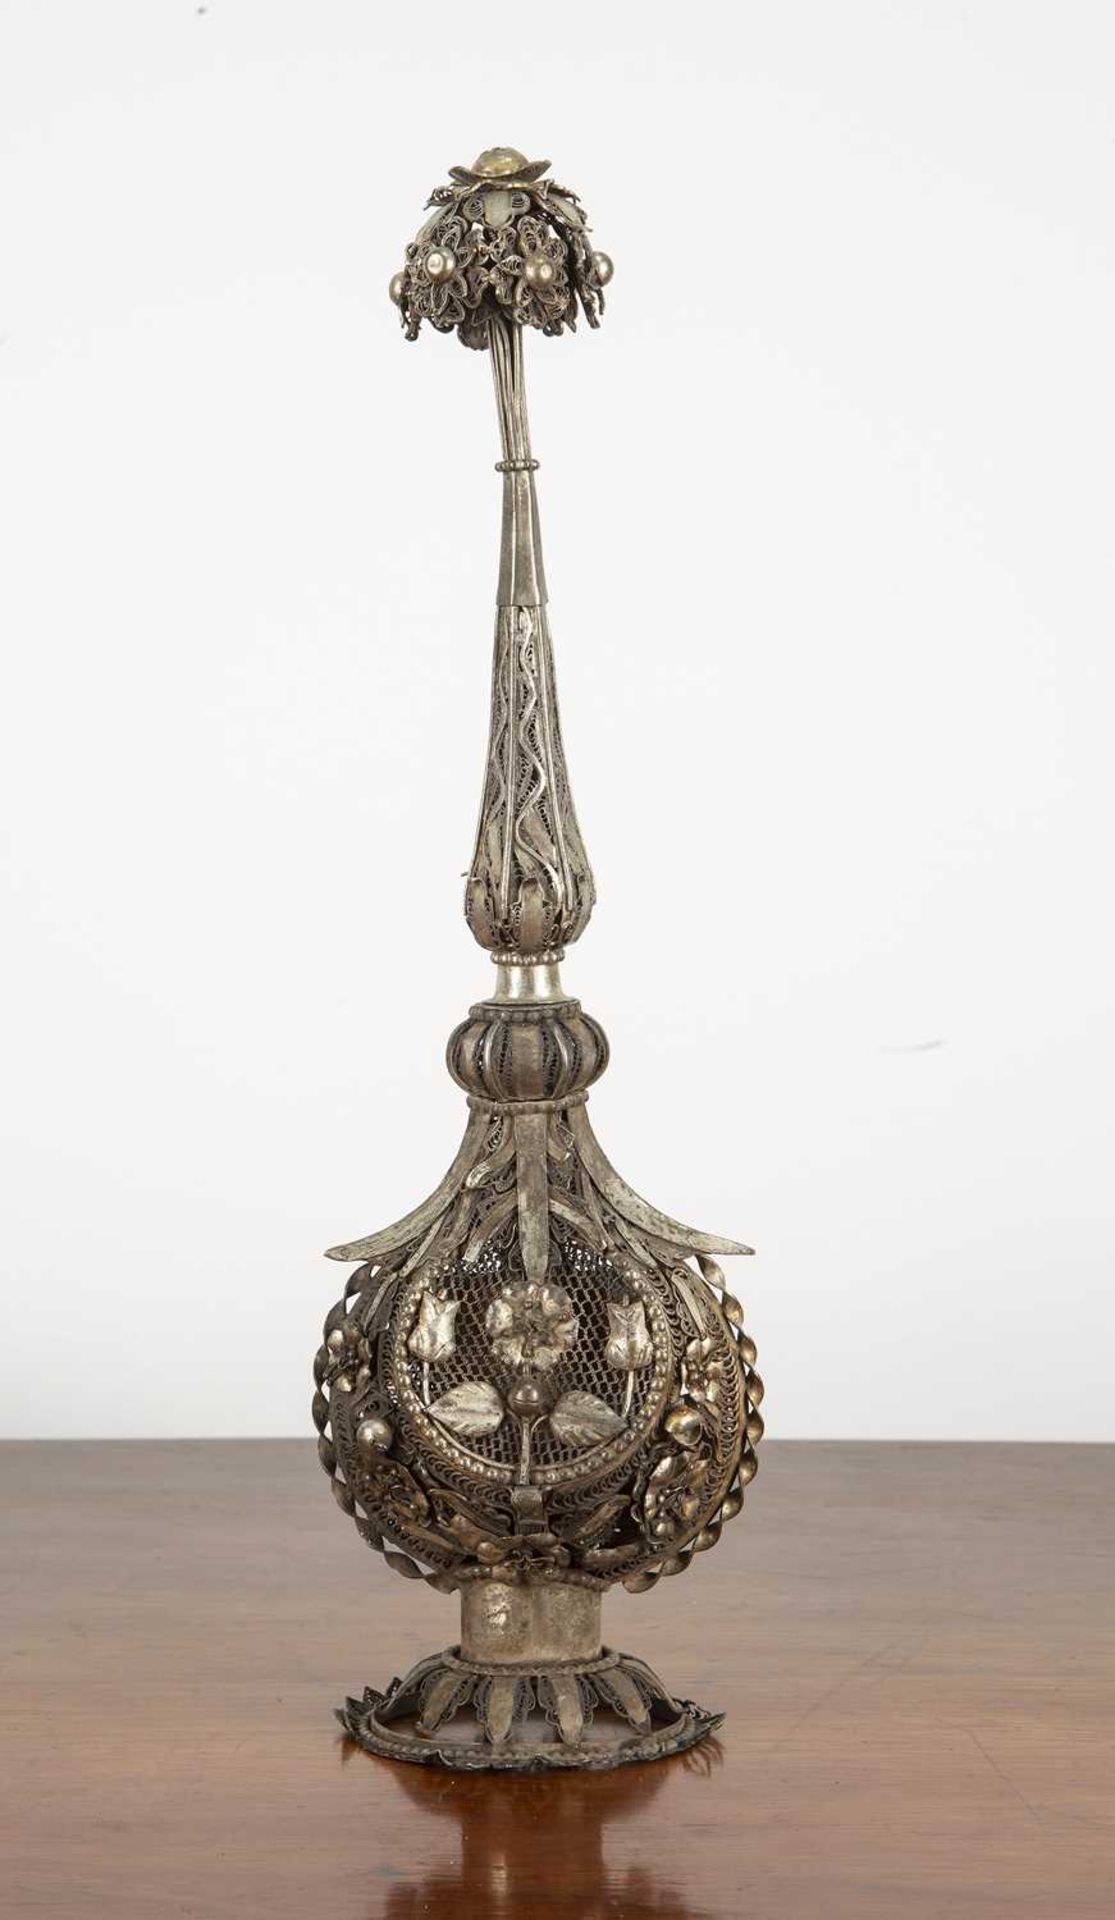 White metal rosewater sprinkler Indian, decorated in fine filigree work, with floral petals set over - Image 2 of 2